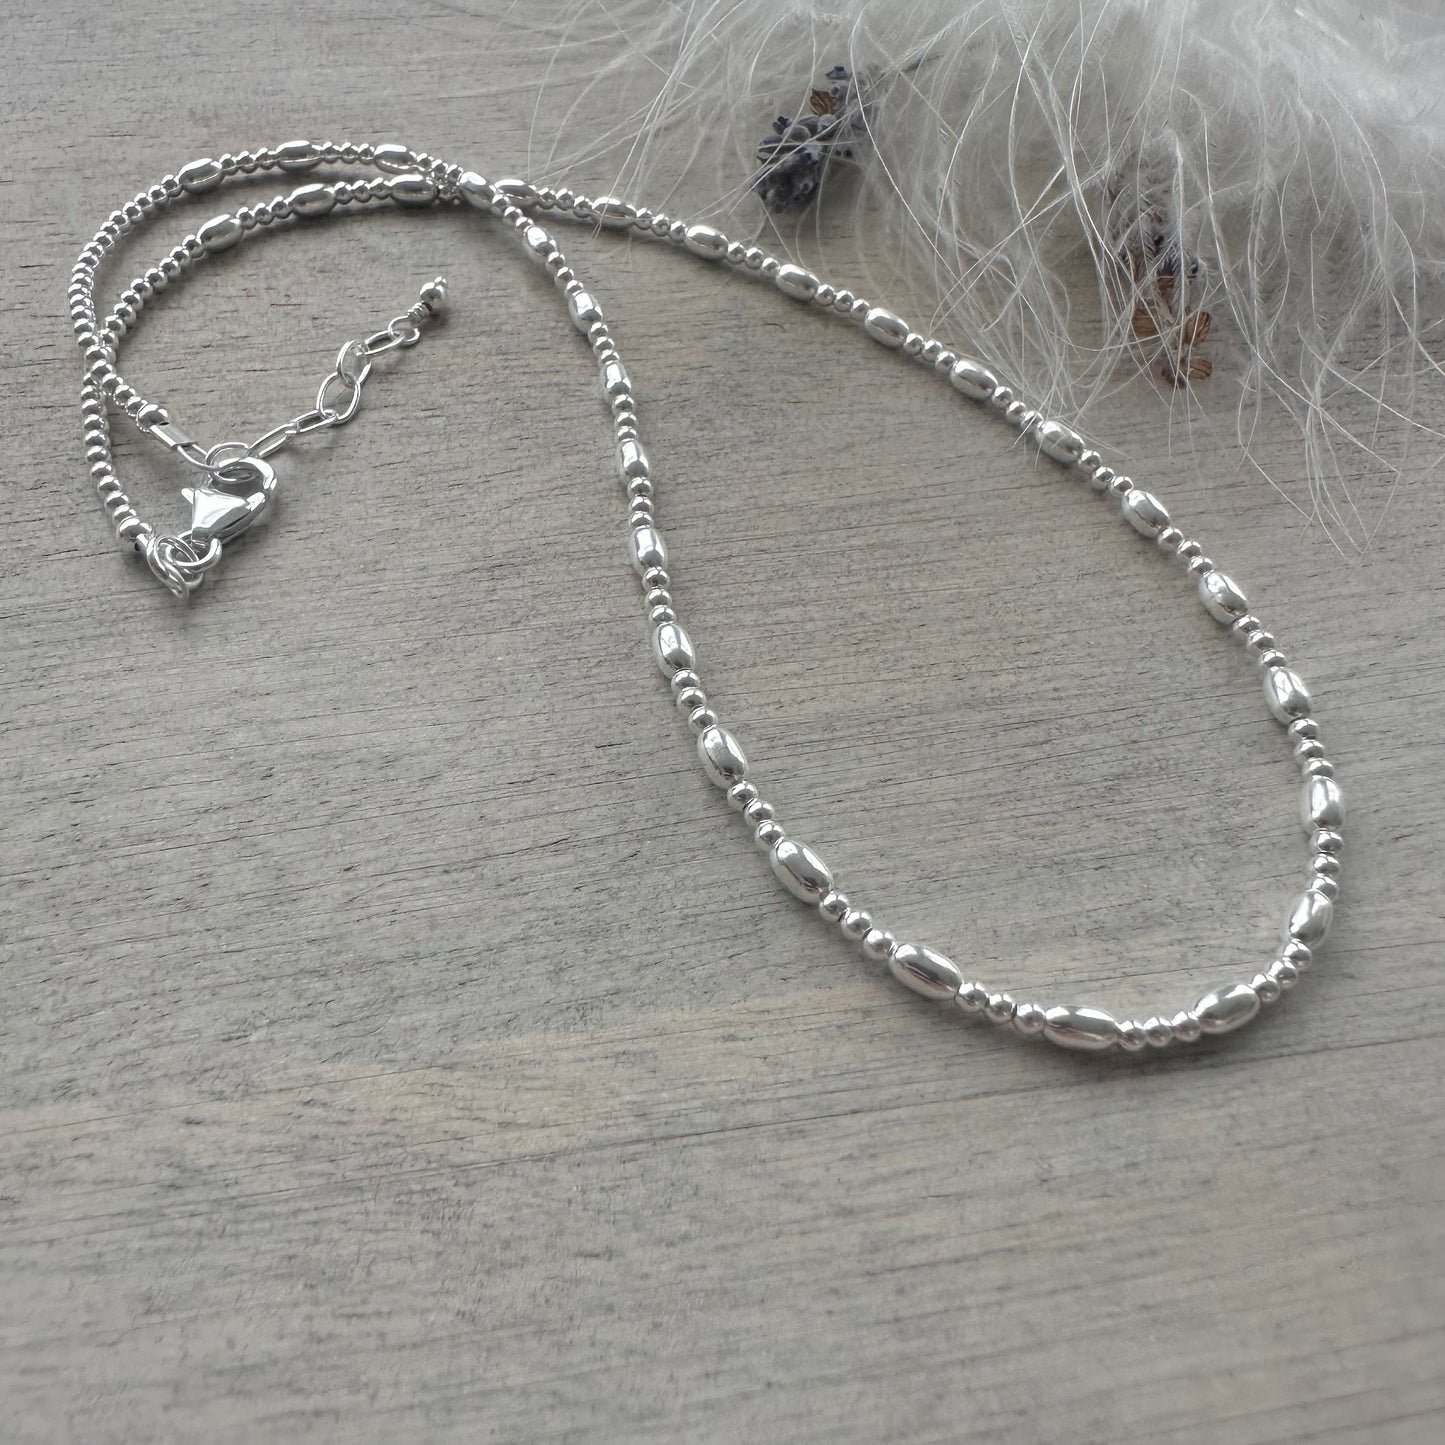 Thin Sterling Silver Oval Beaded Necklace, dainty necklace